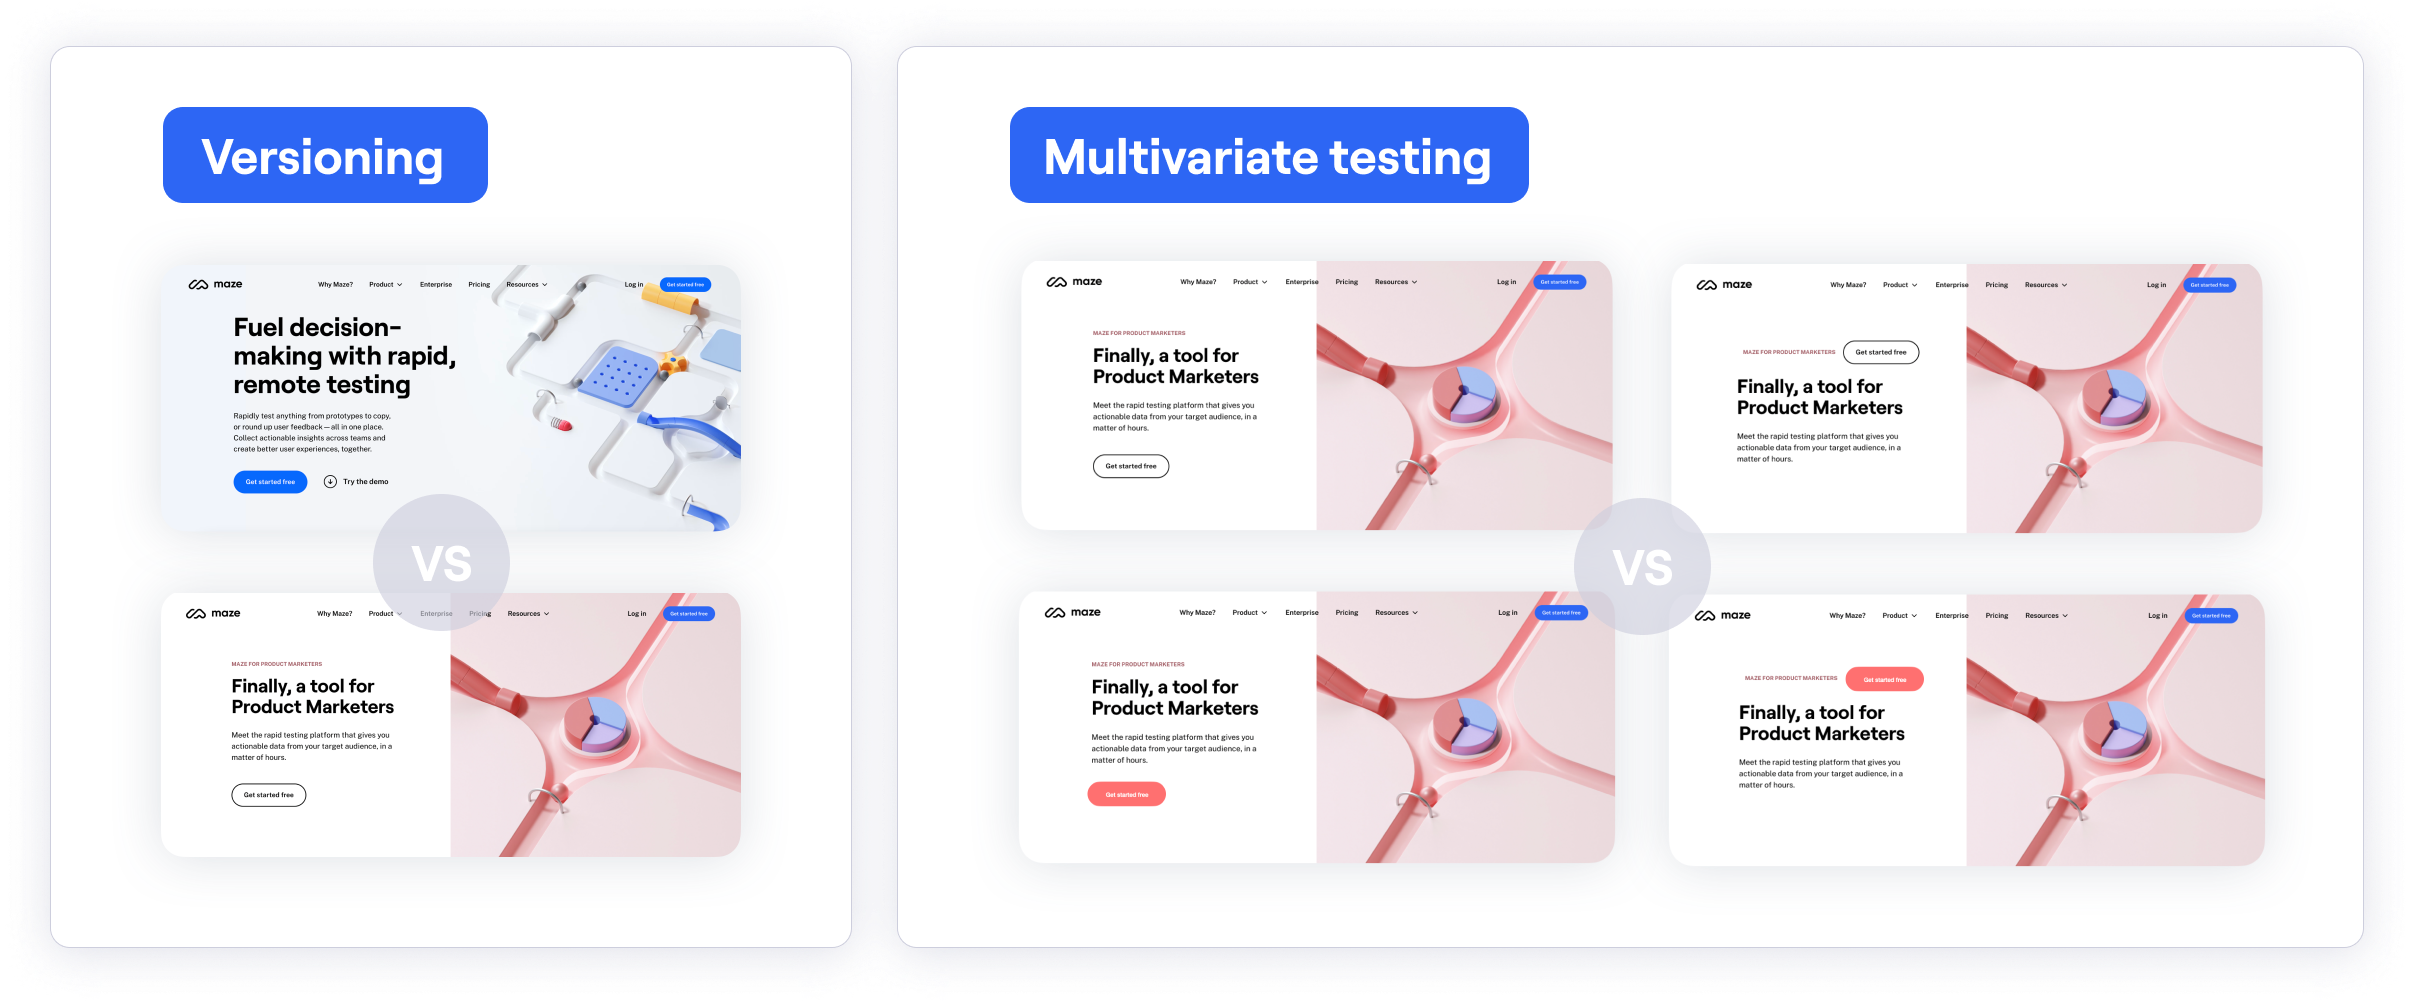 maze-usability-testing-comparison-Versioning-Multivariate.png